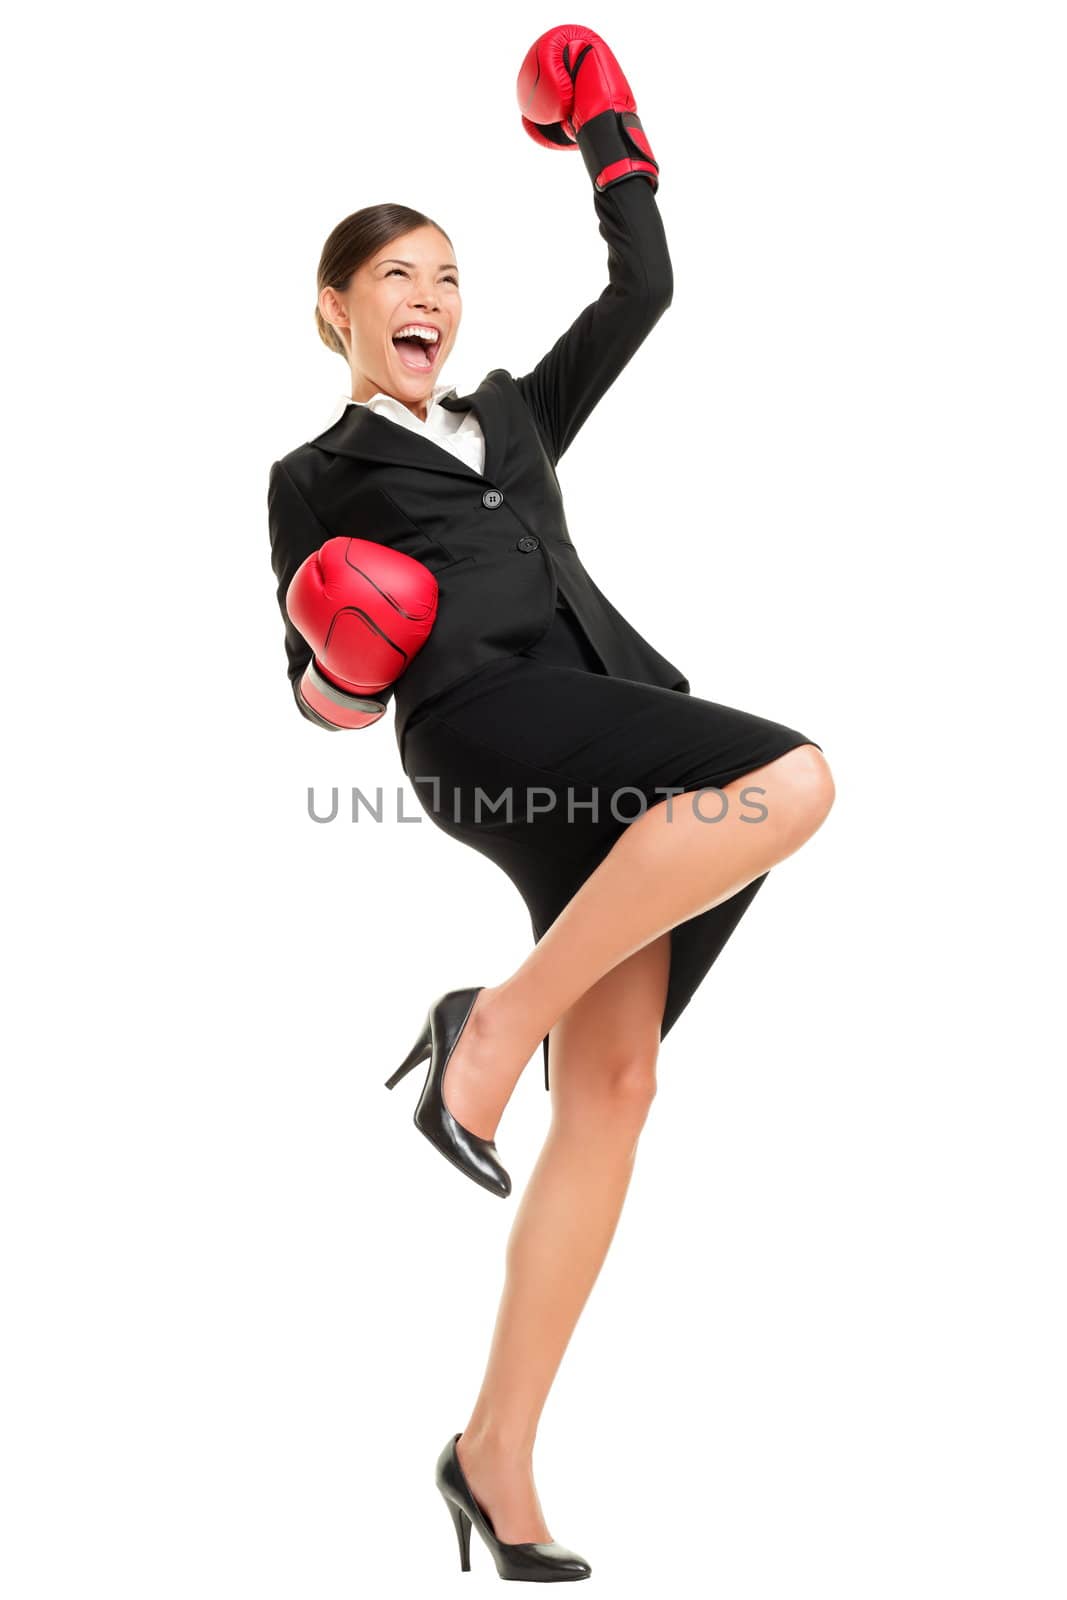 Winning business woman celebrating wearing boxing gloves and business suit. Winner and business success concept photo of young multiracial Asian Caucasian businesswoman isolated on white background.